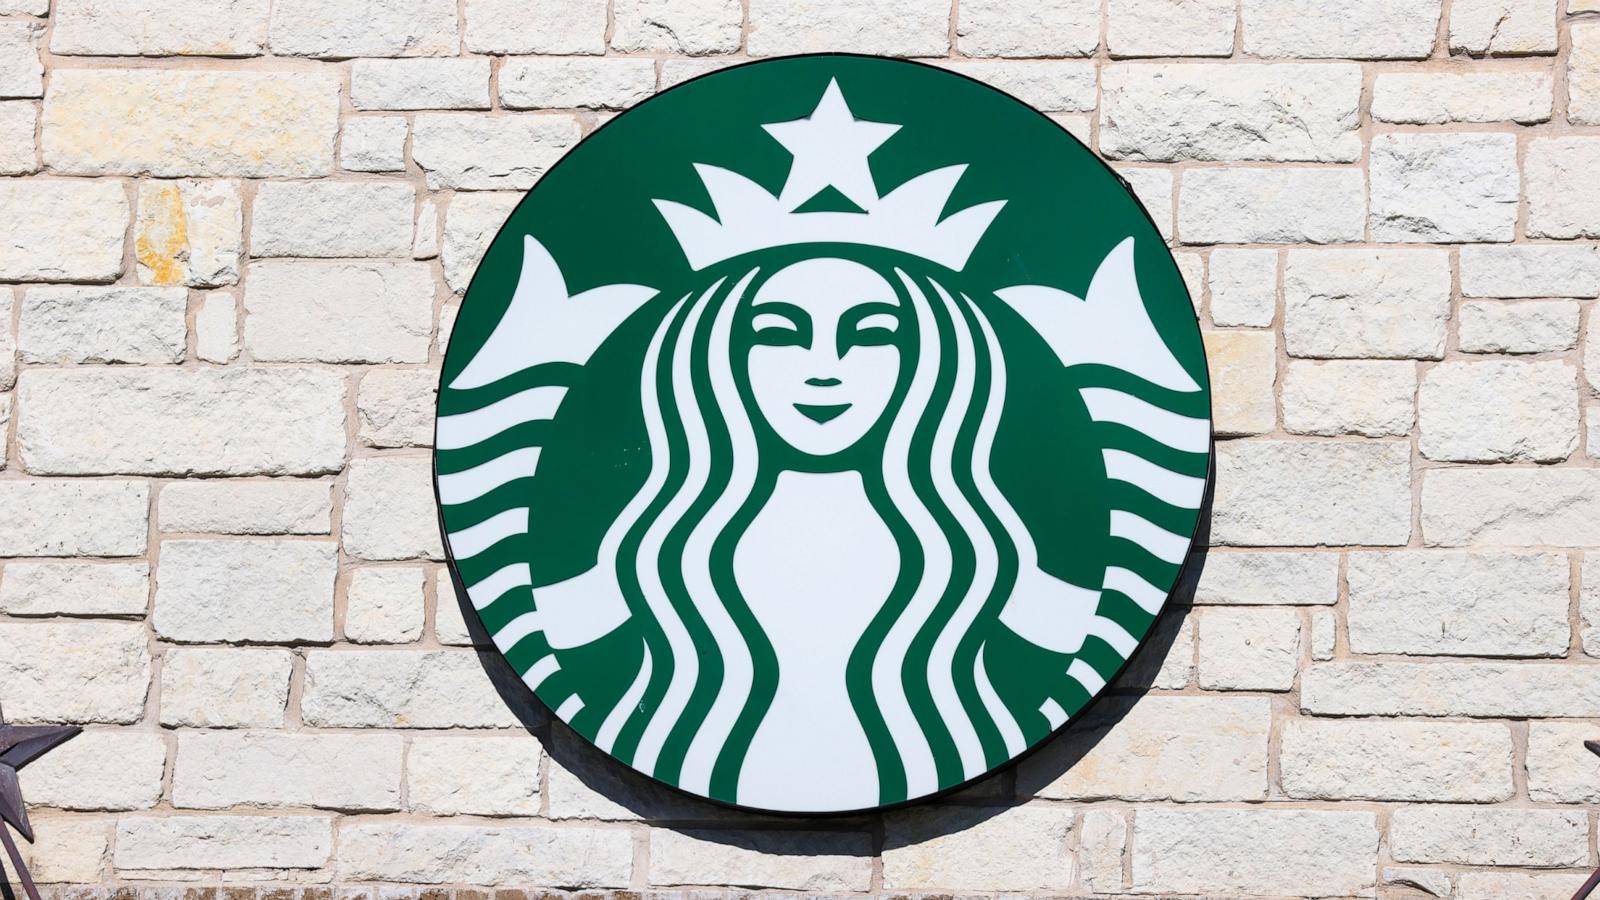 Starbucks Baristas Have Been Told Not To Fill Reusable Cups As The